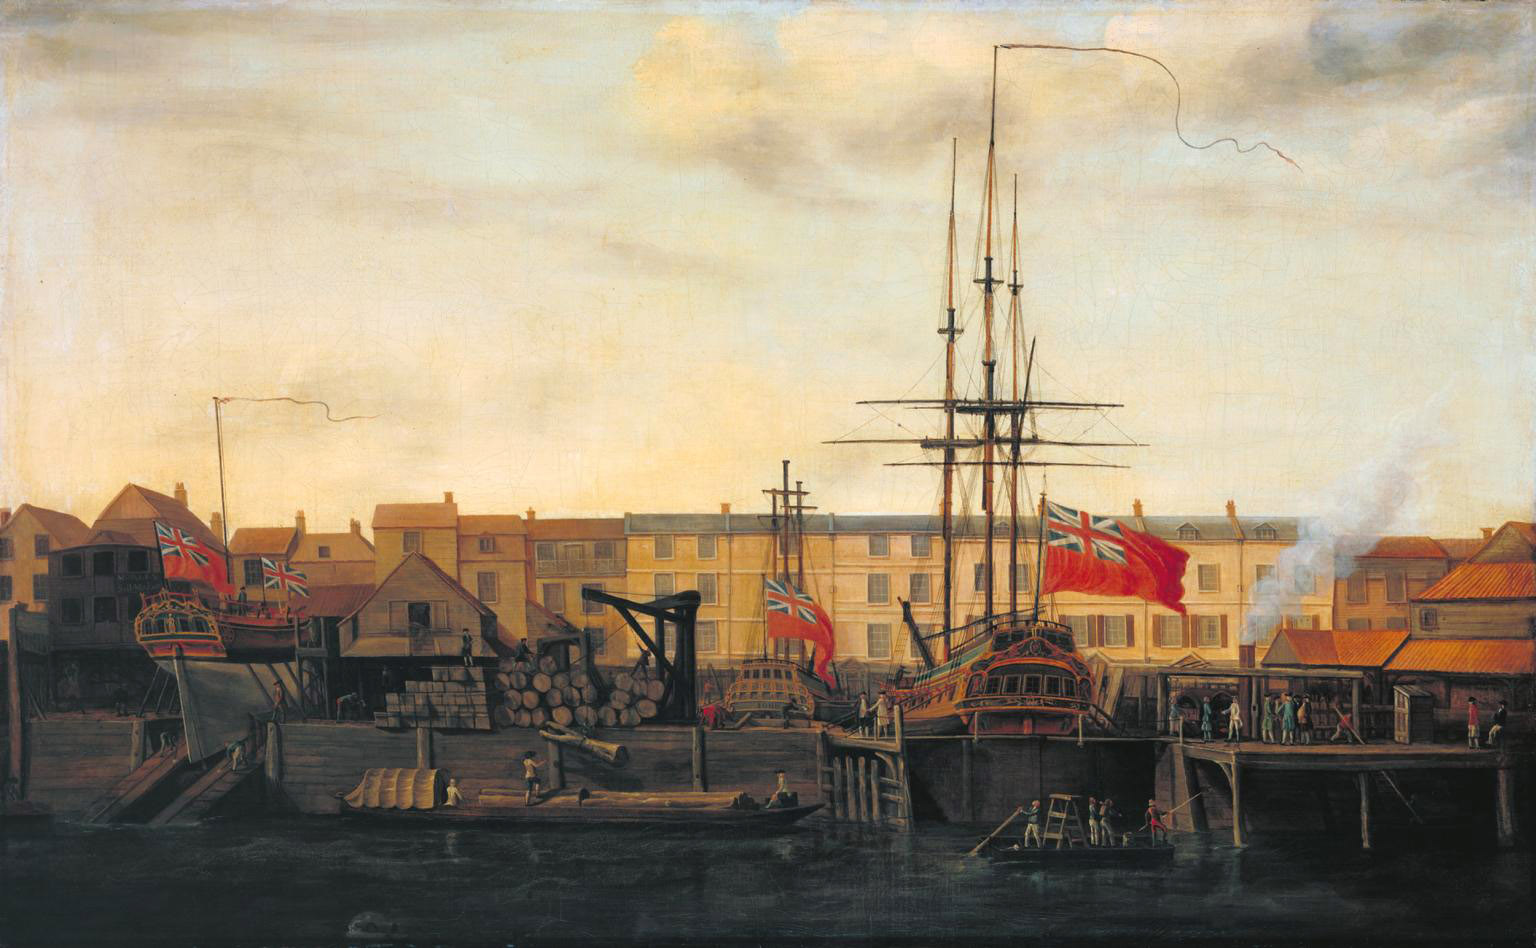 The Royal George at Deptford Showing Launch of The Cambridge, by John Cleveley the Elder, 1757